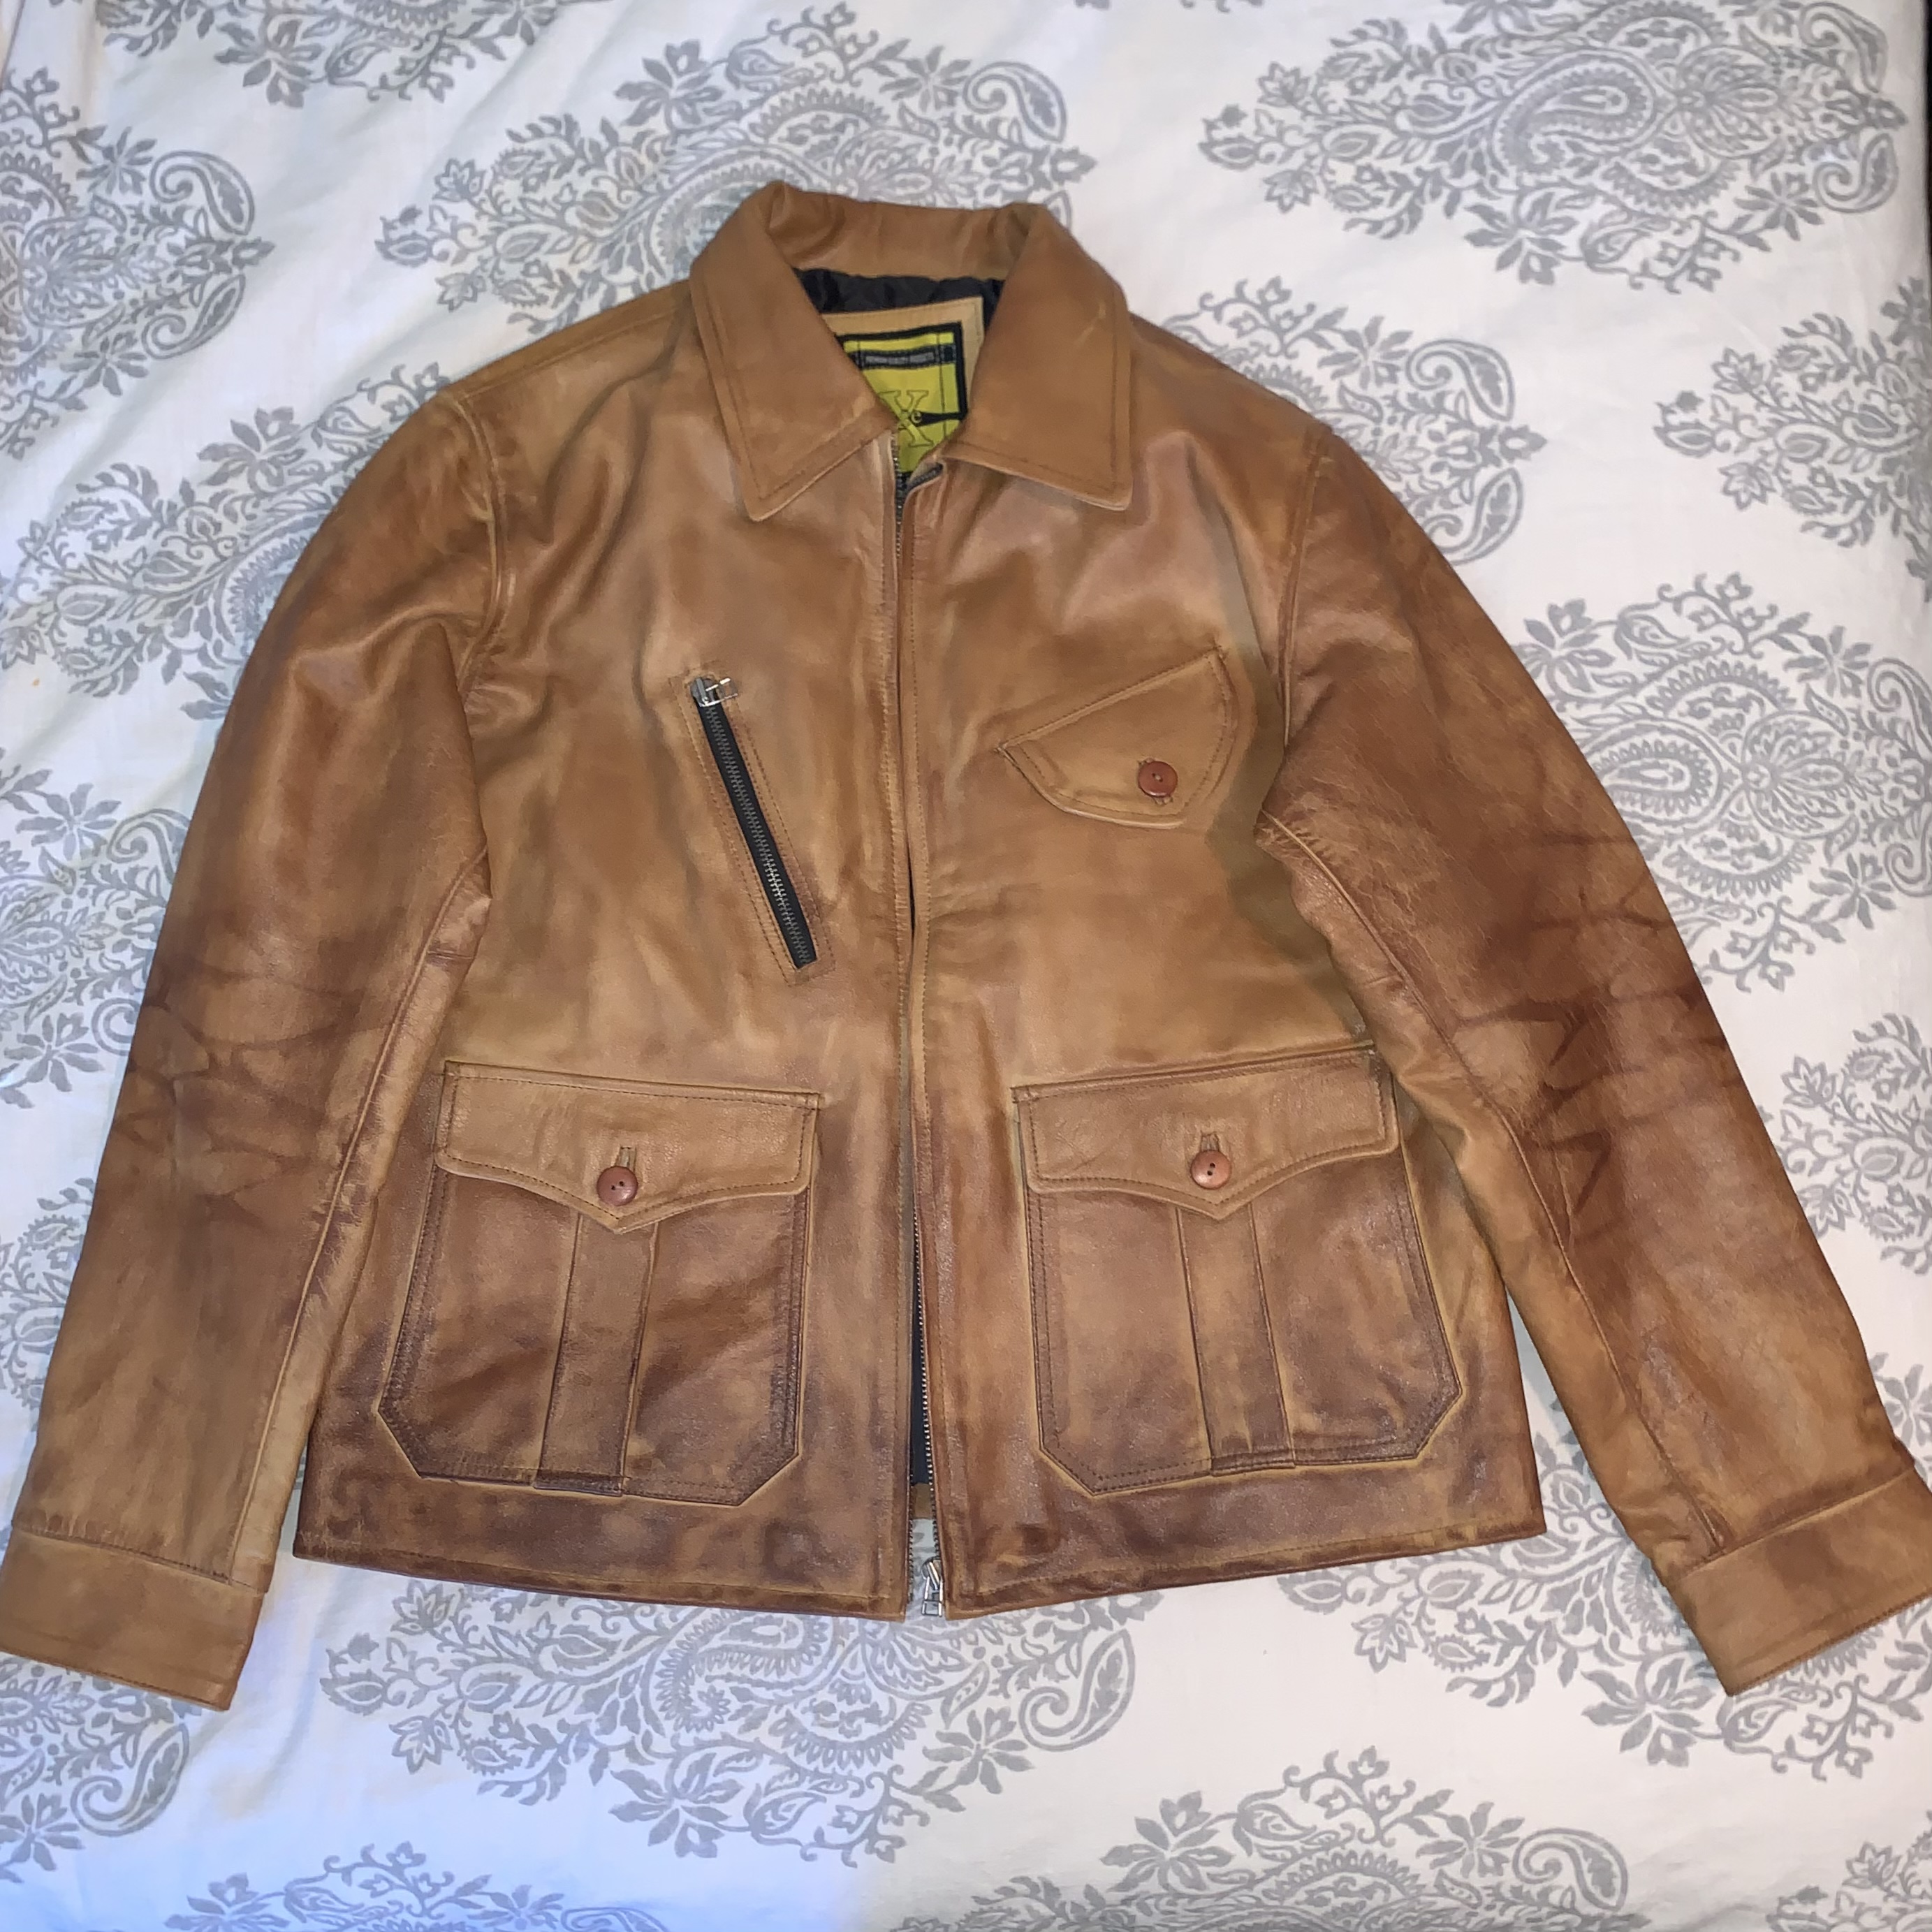 Does anyone know what this “newsboy” jacket is based o. | The Fedora Lounge